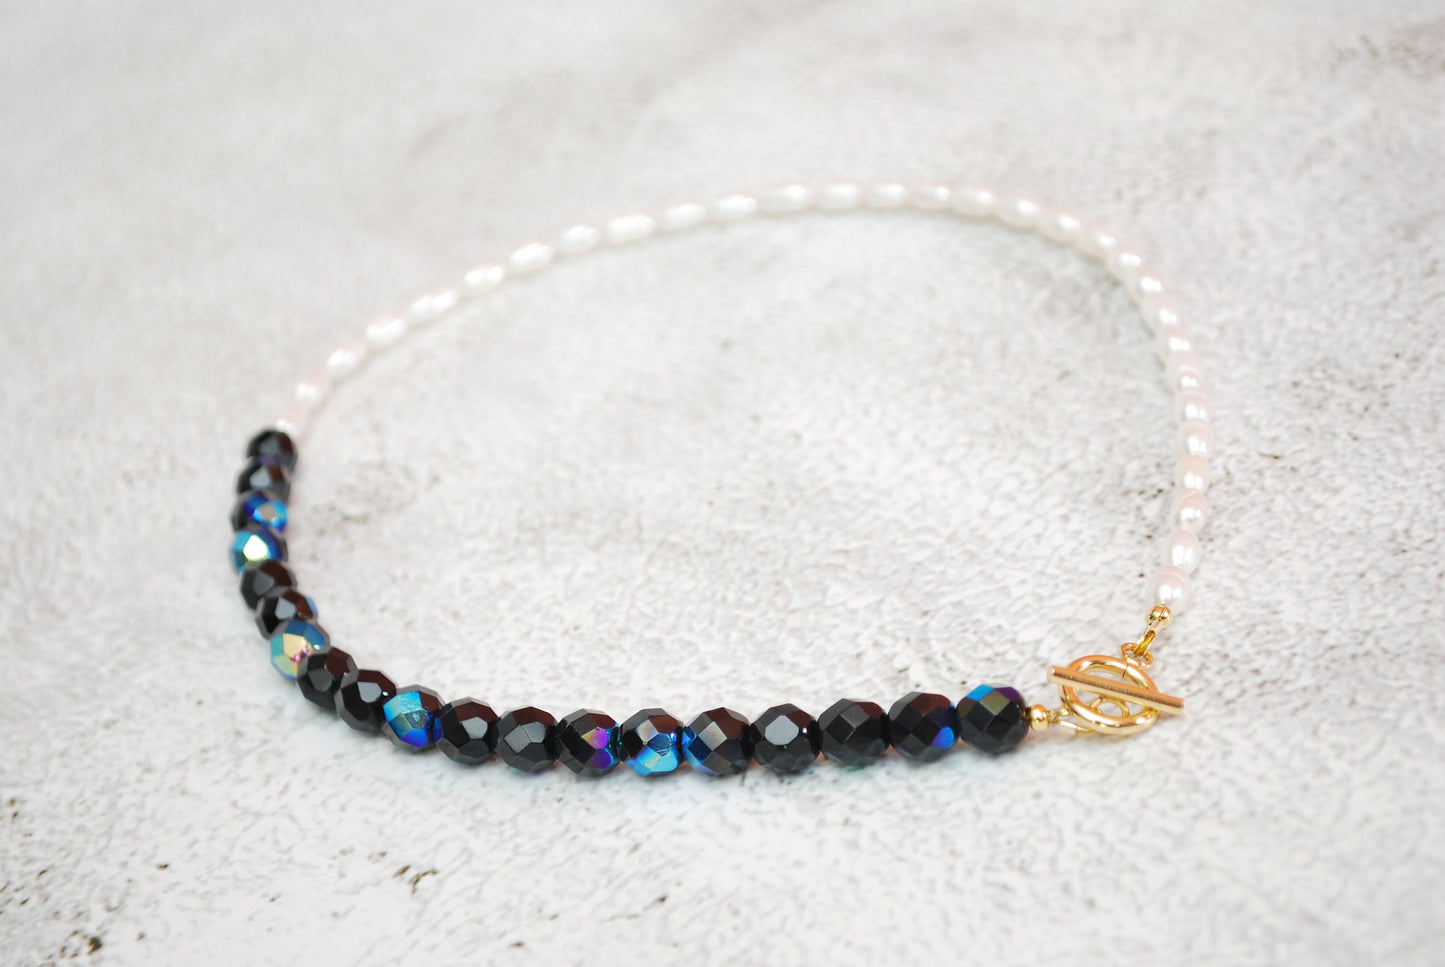 Back and white necklace, half freshwater pearl & half black glass beads choker, elegant jewelry  42cm 17"